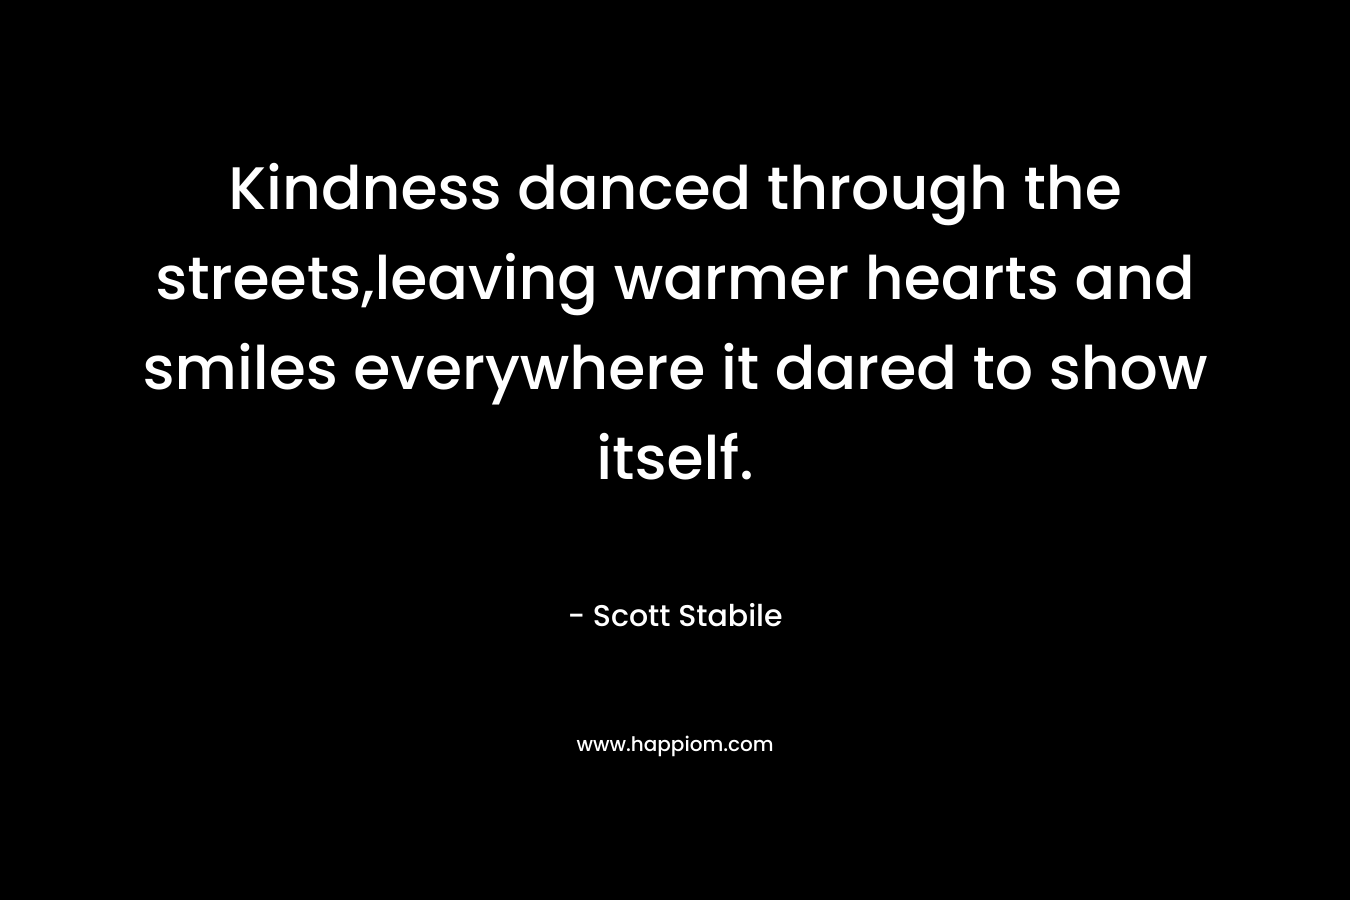 Kindness danced through the streets,leaving warmer hearts and smiles everywhere it dared to show itself. – Scott Stabile